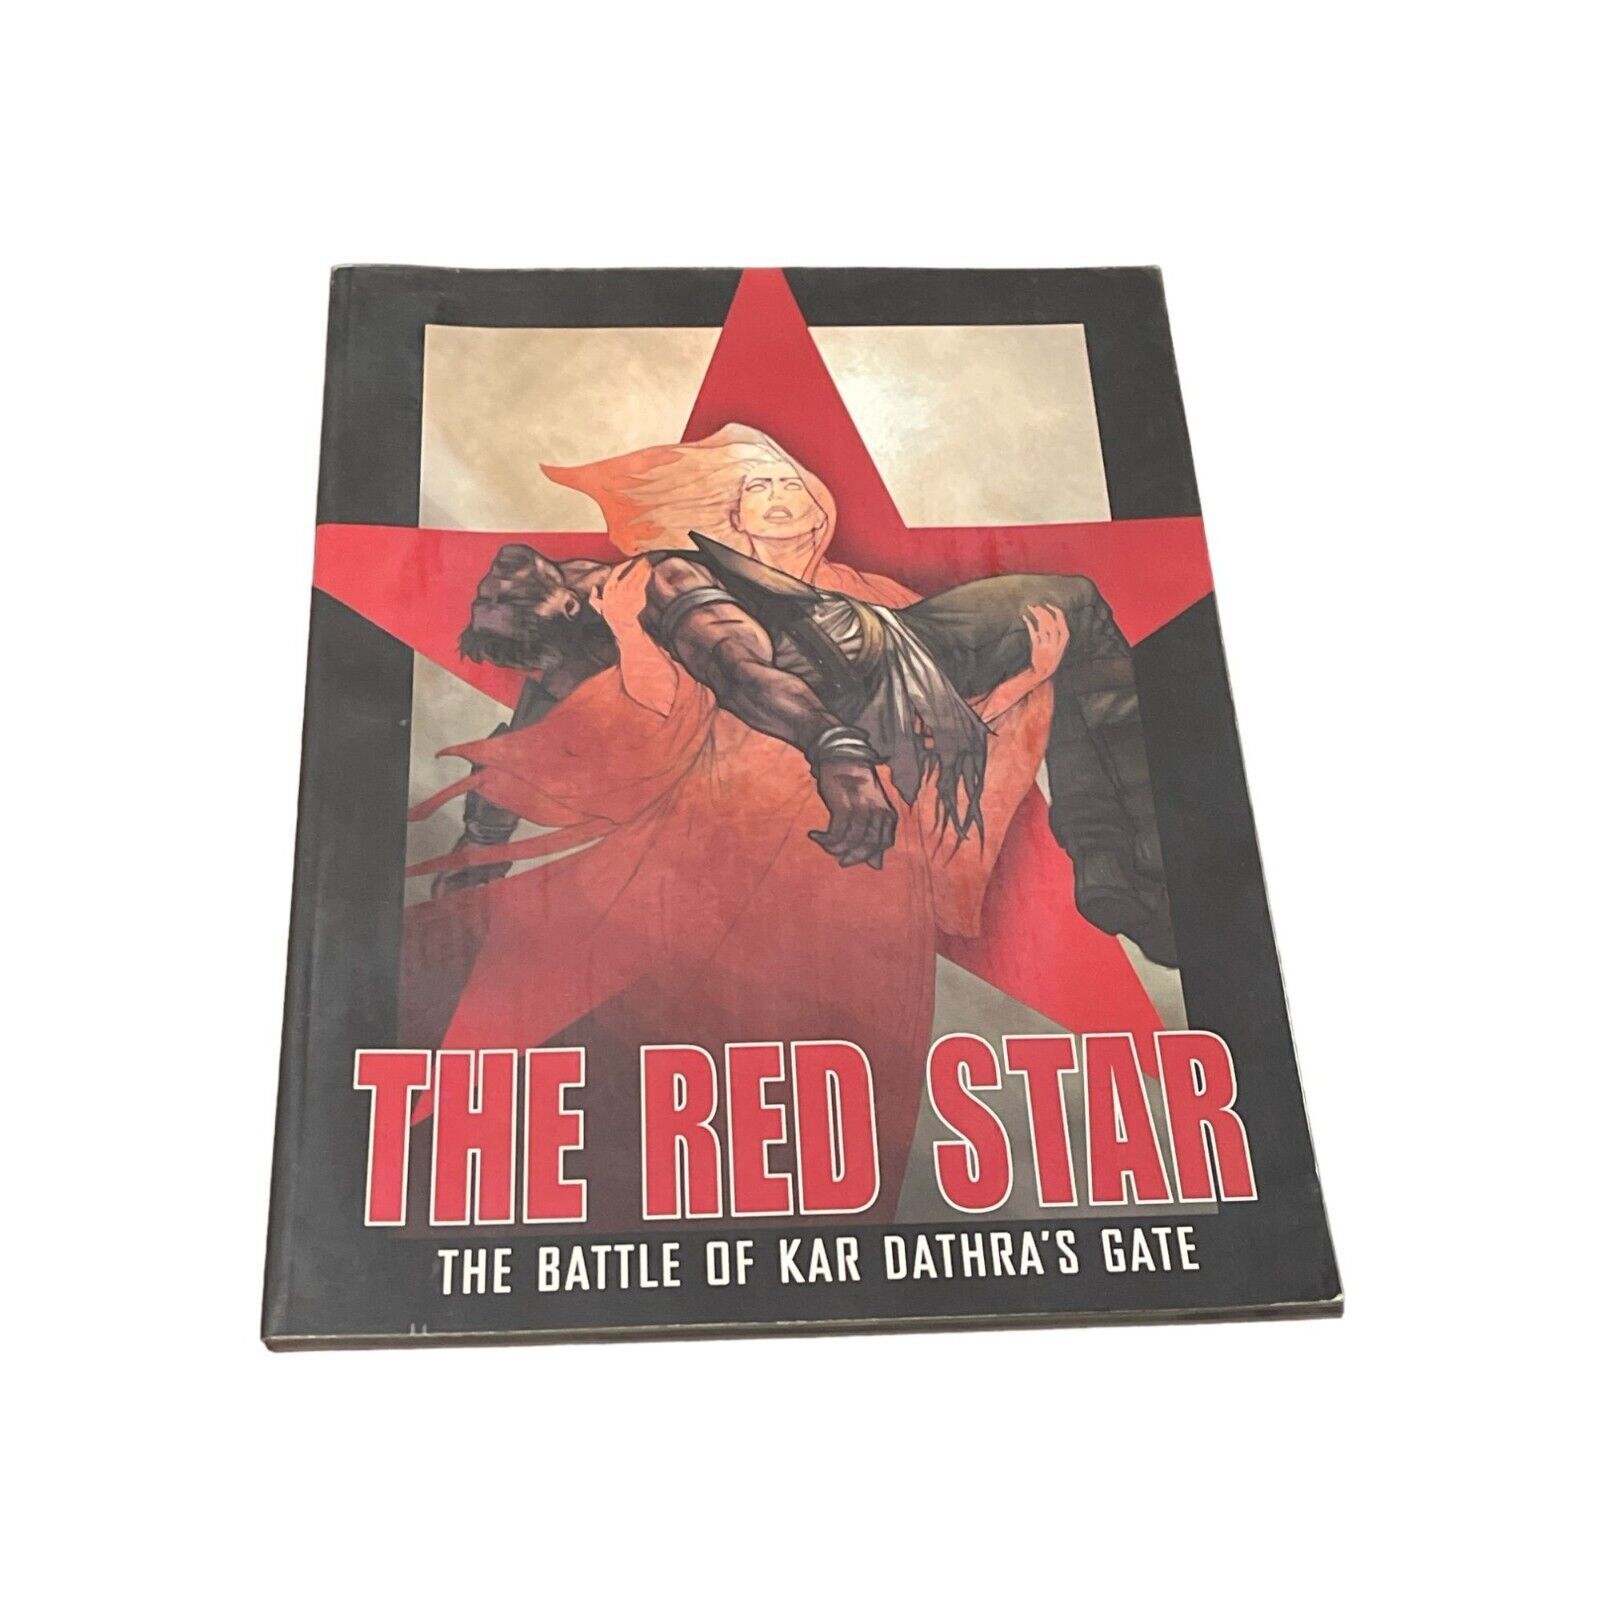 Primary image for The Red Star The Battle of Kar Dathras Gate Vol I by Bradley Kayl and Graphic No